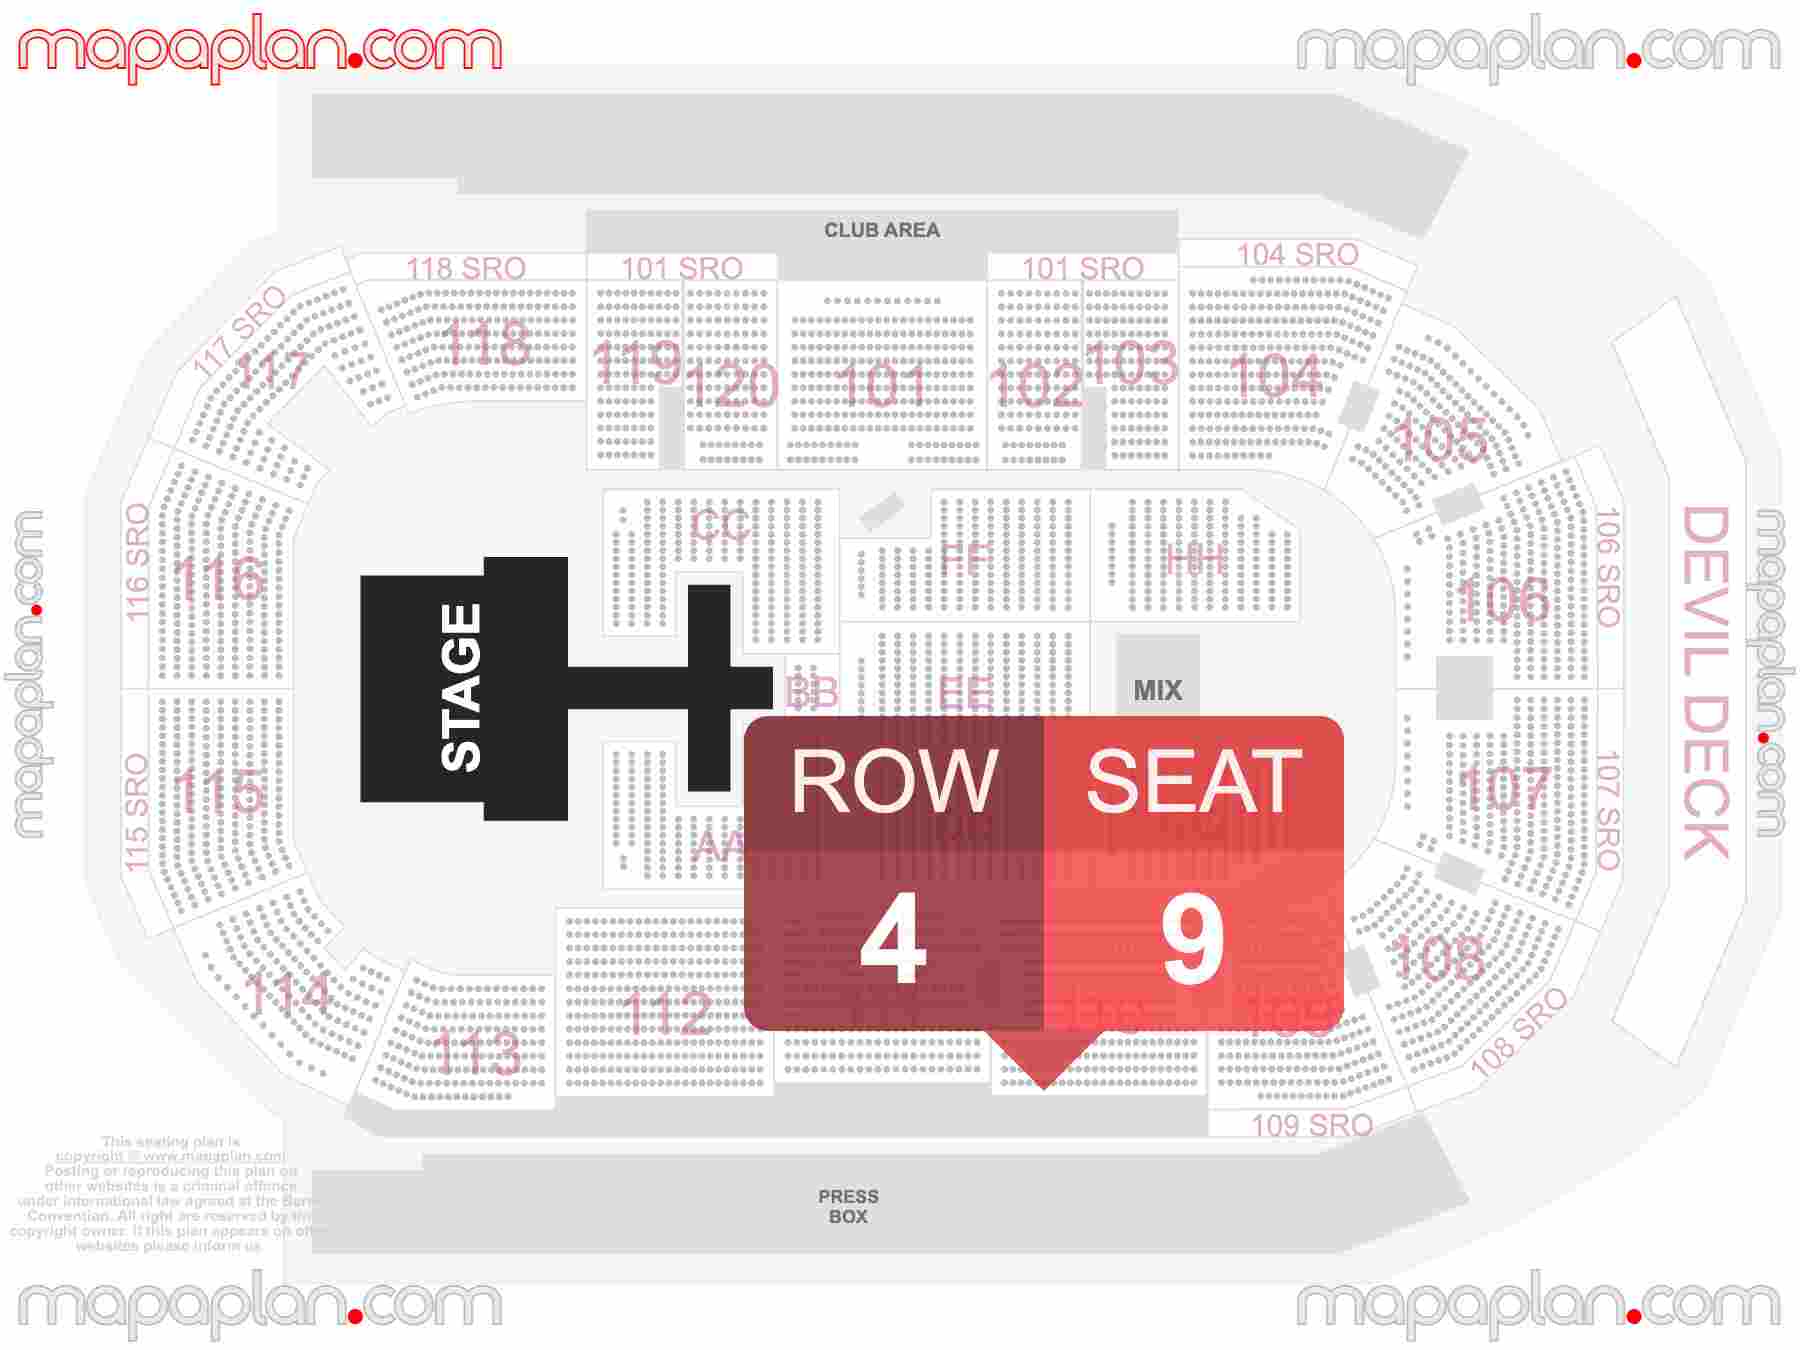 Tempe Mullett Arena seating chart Concert detailed seat numbers and row numbering chart with interactive map plan layout